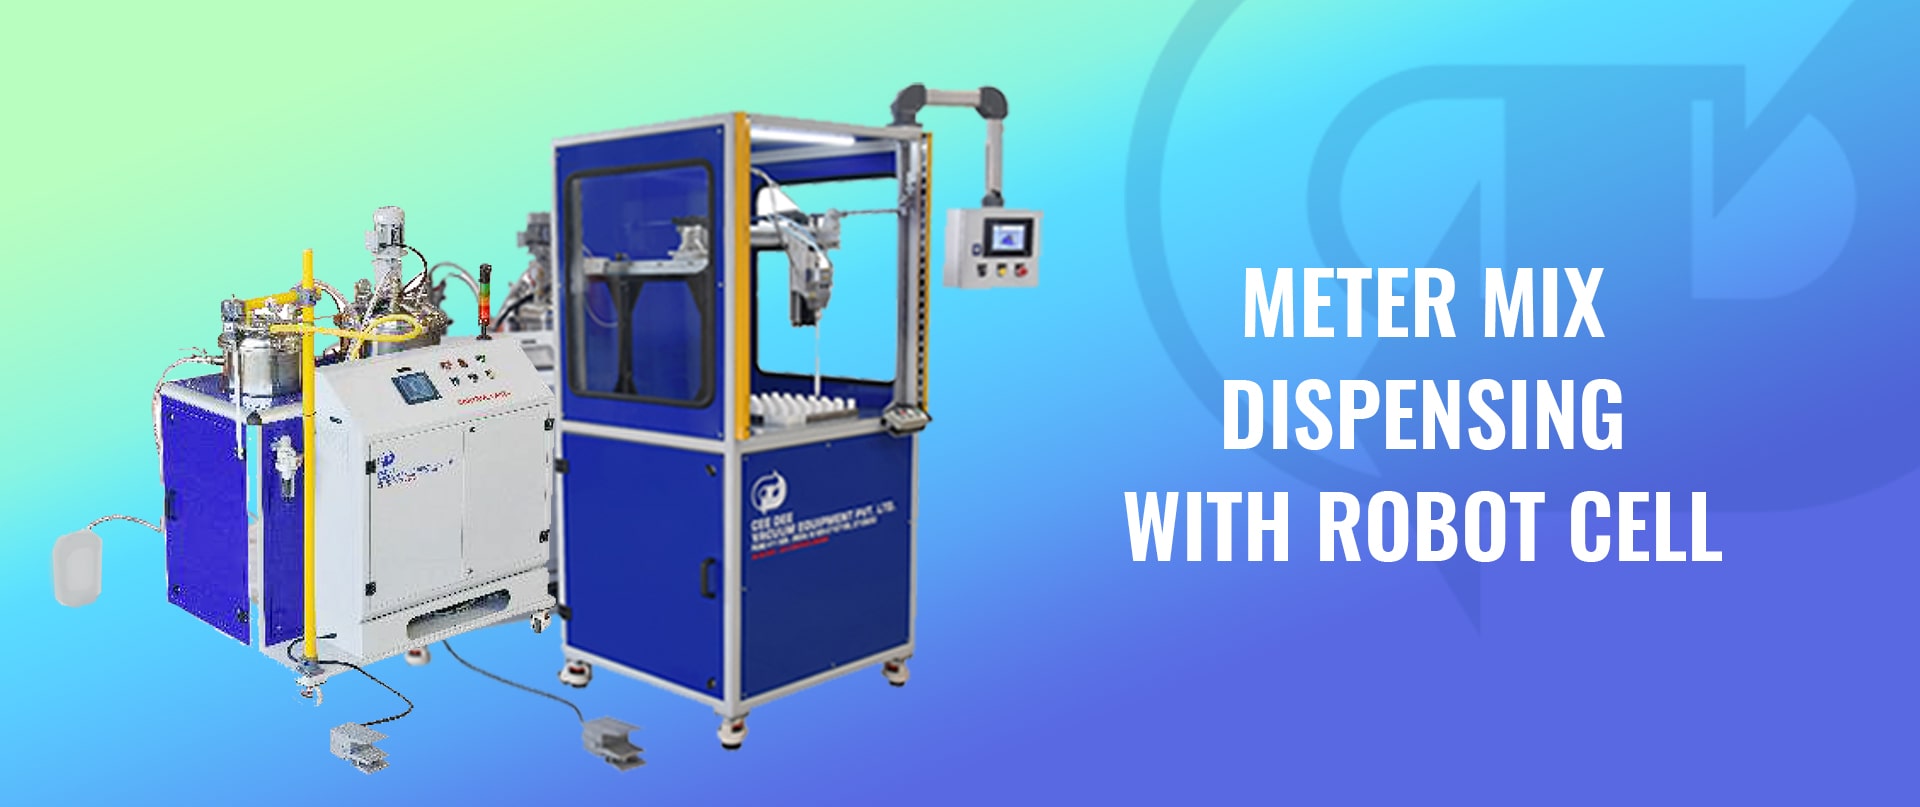 Meter Mix Dispensing with Robot Cell